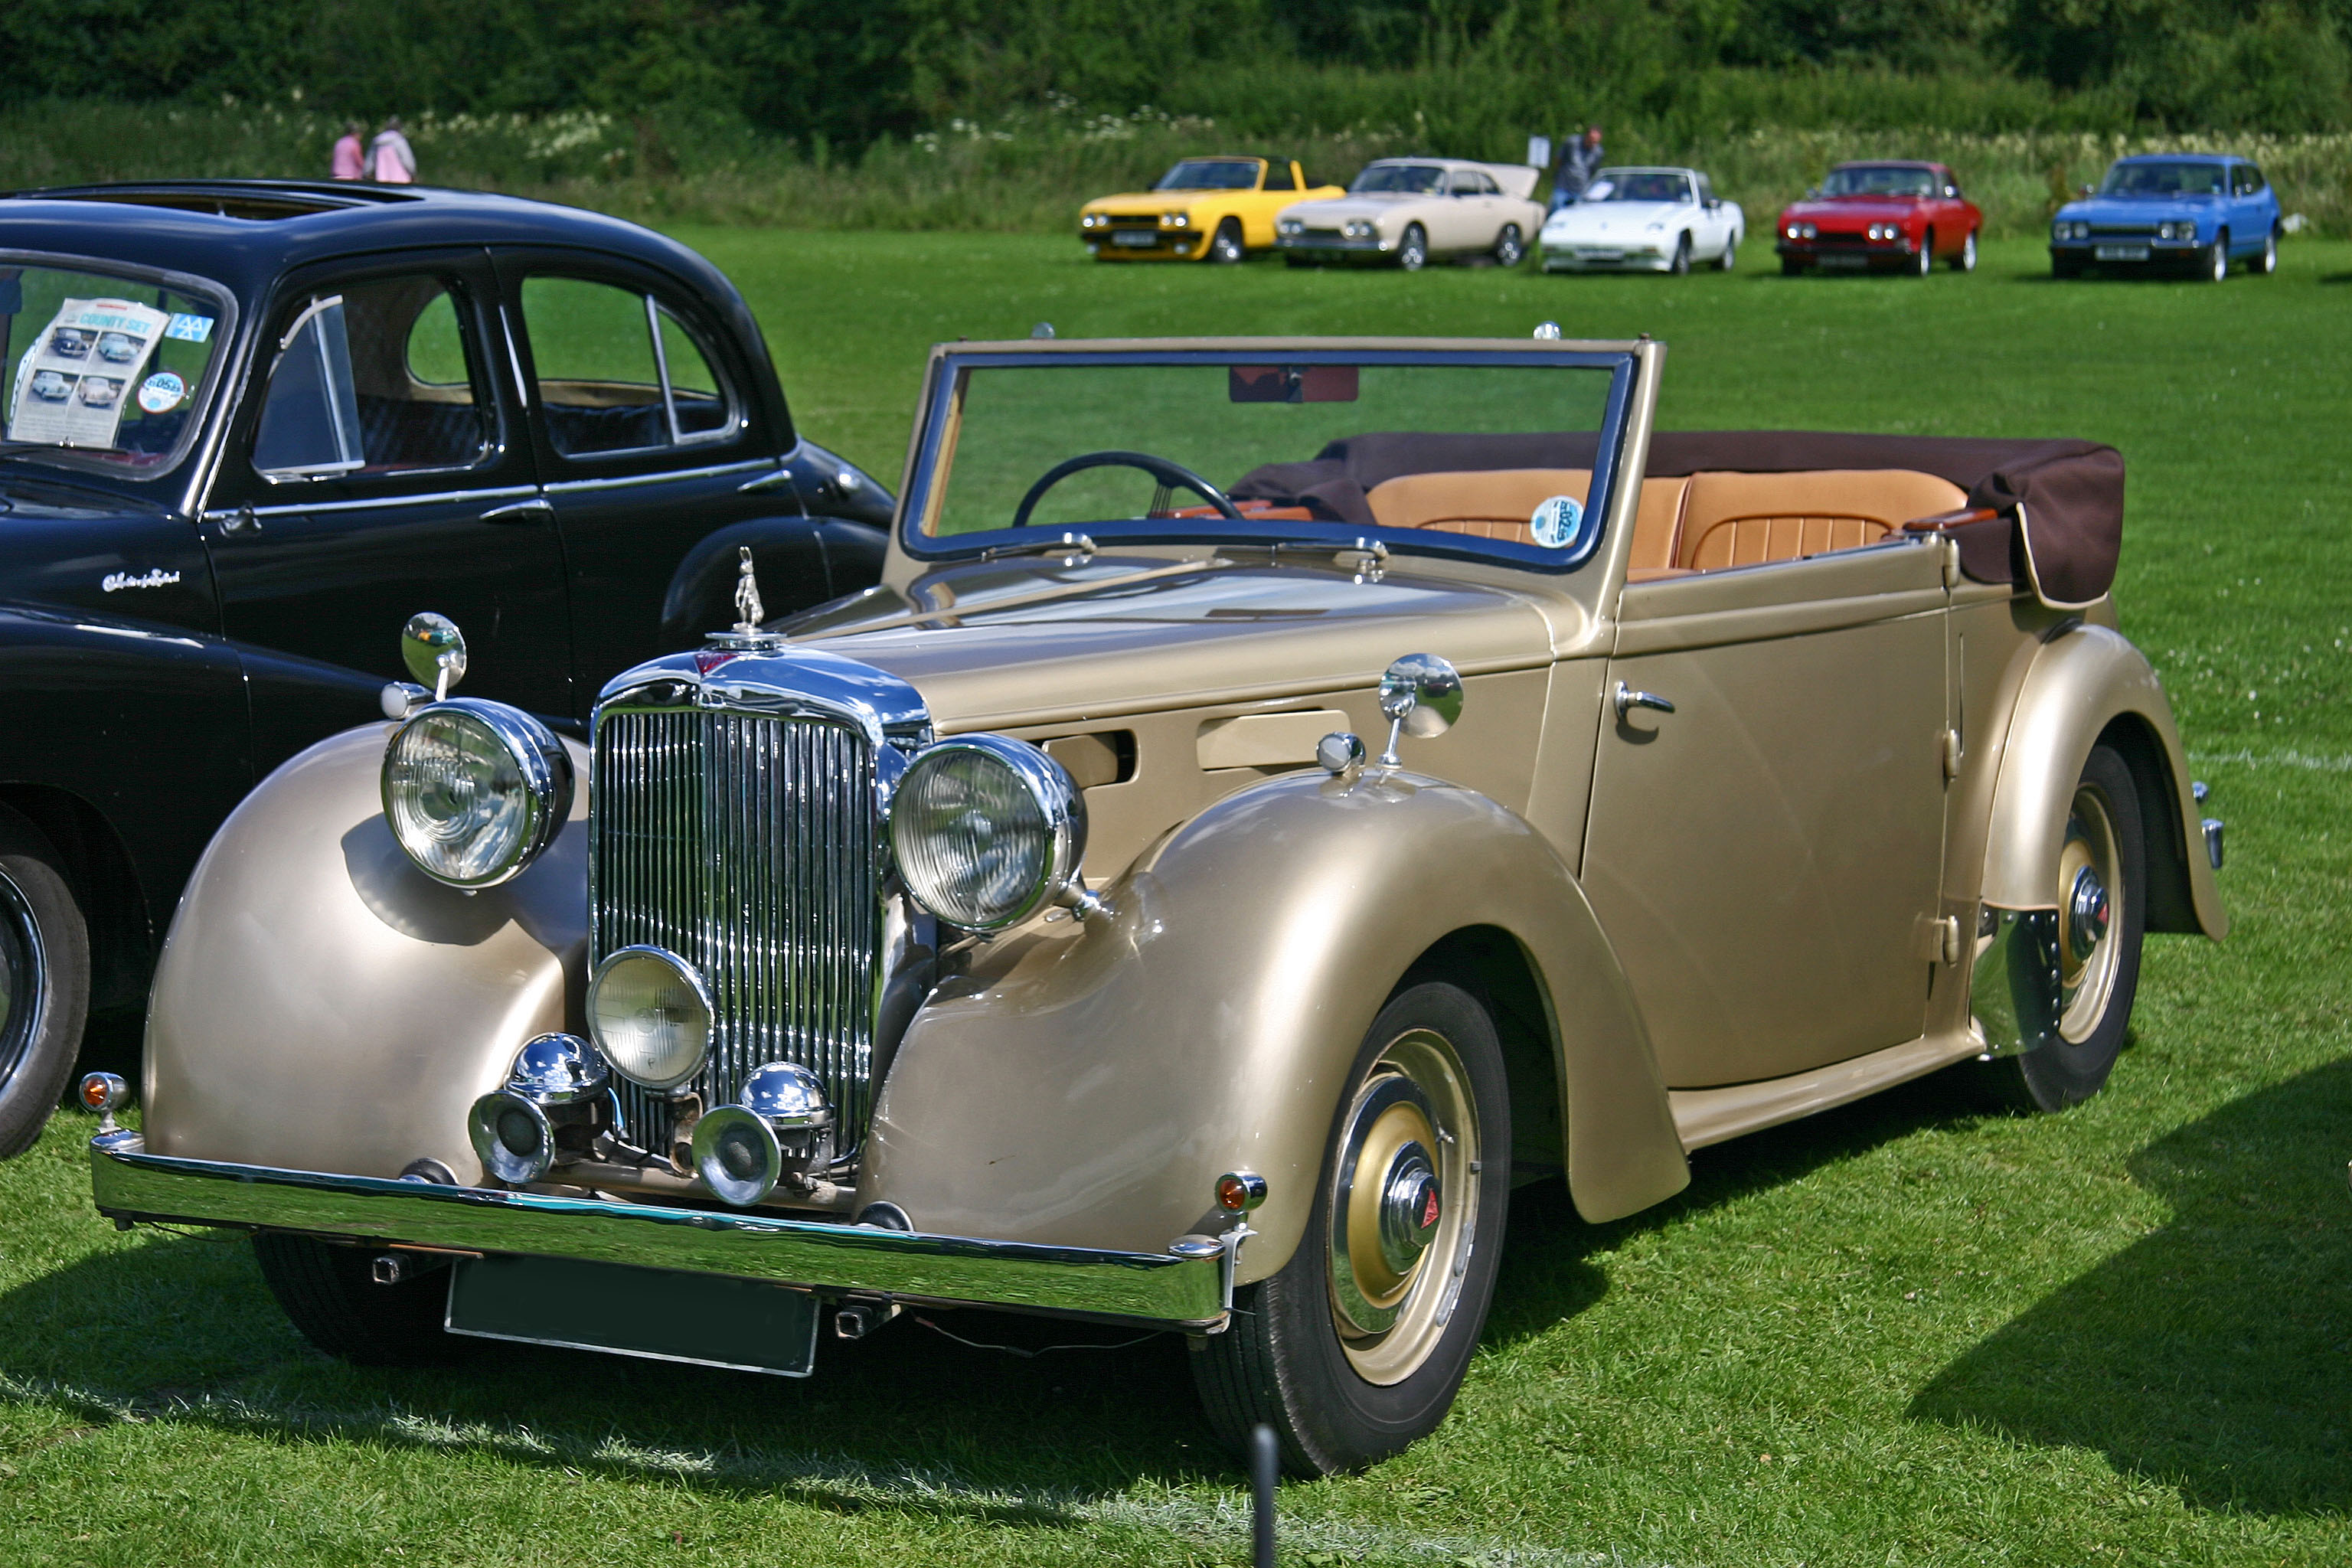 Alvis TA 14 cabriolet Photo Gallery: Photo #06 out of 11, Image ...